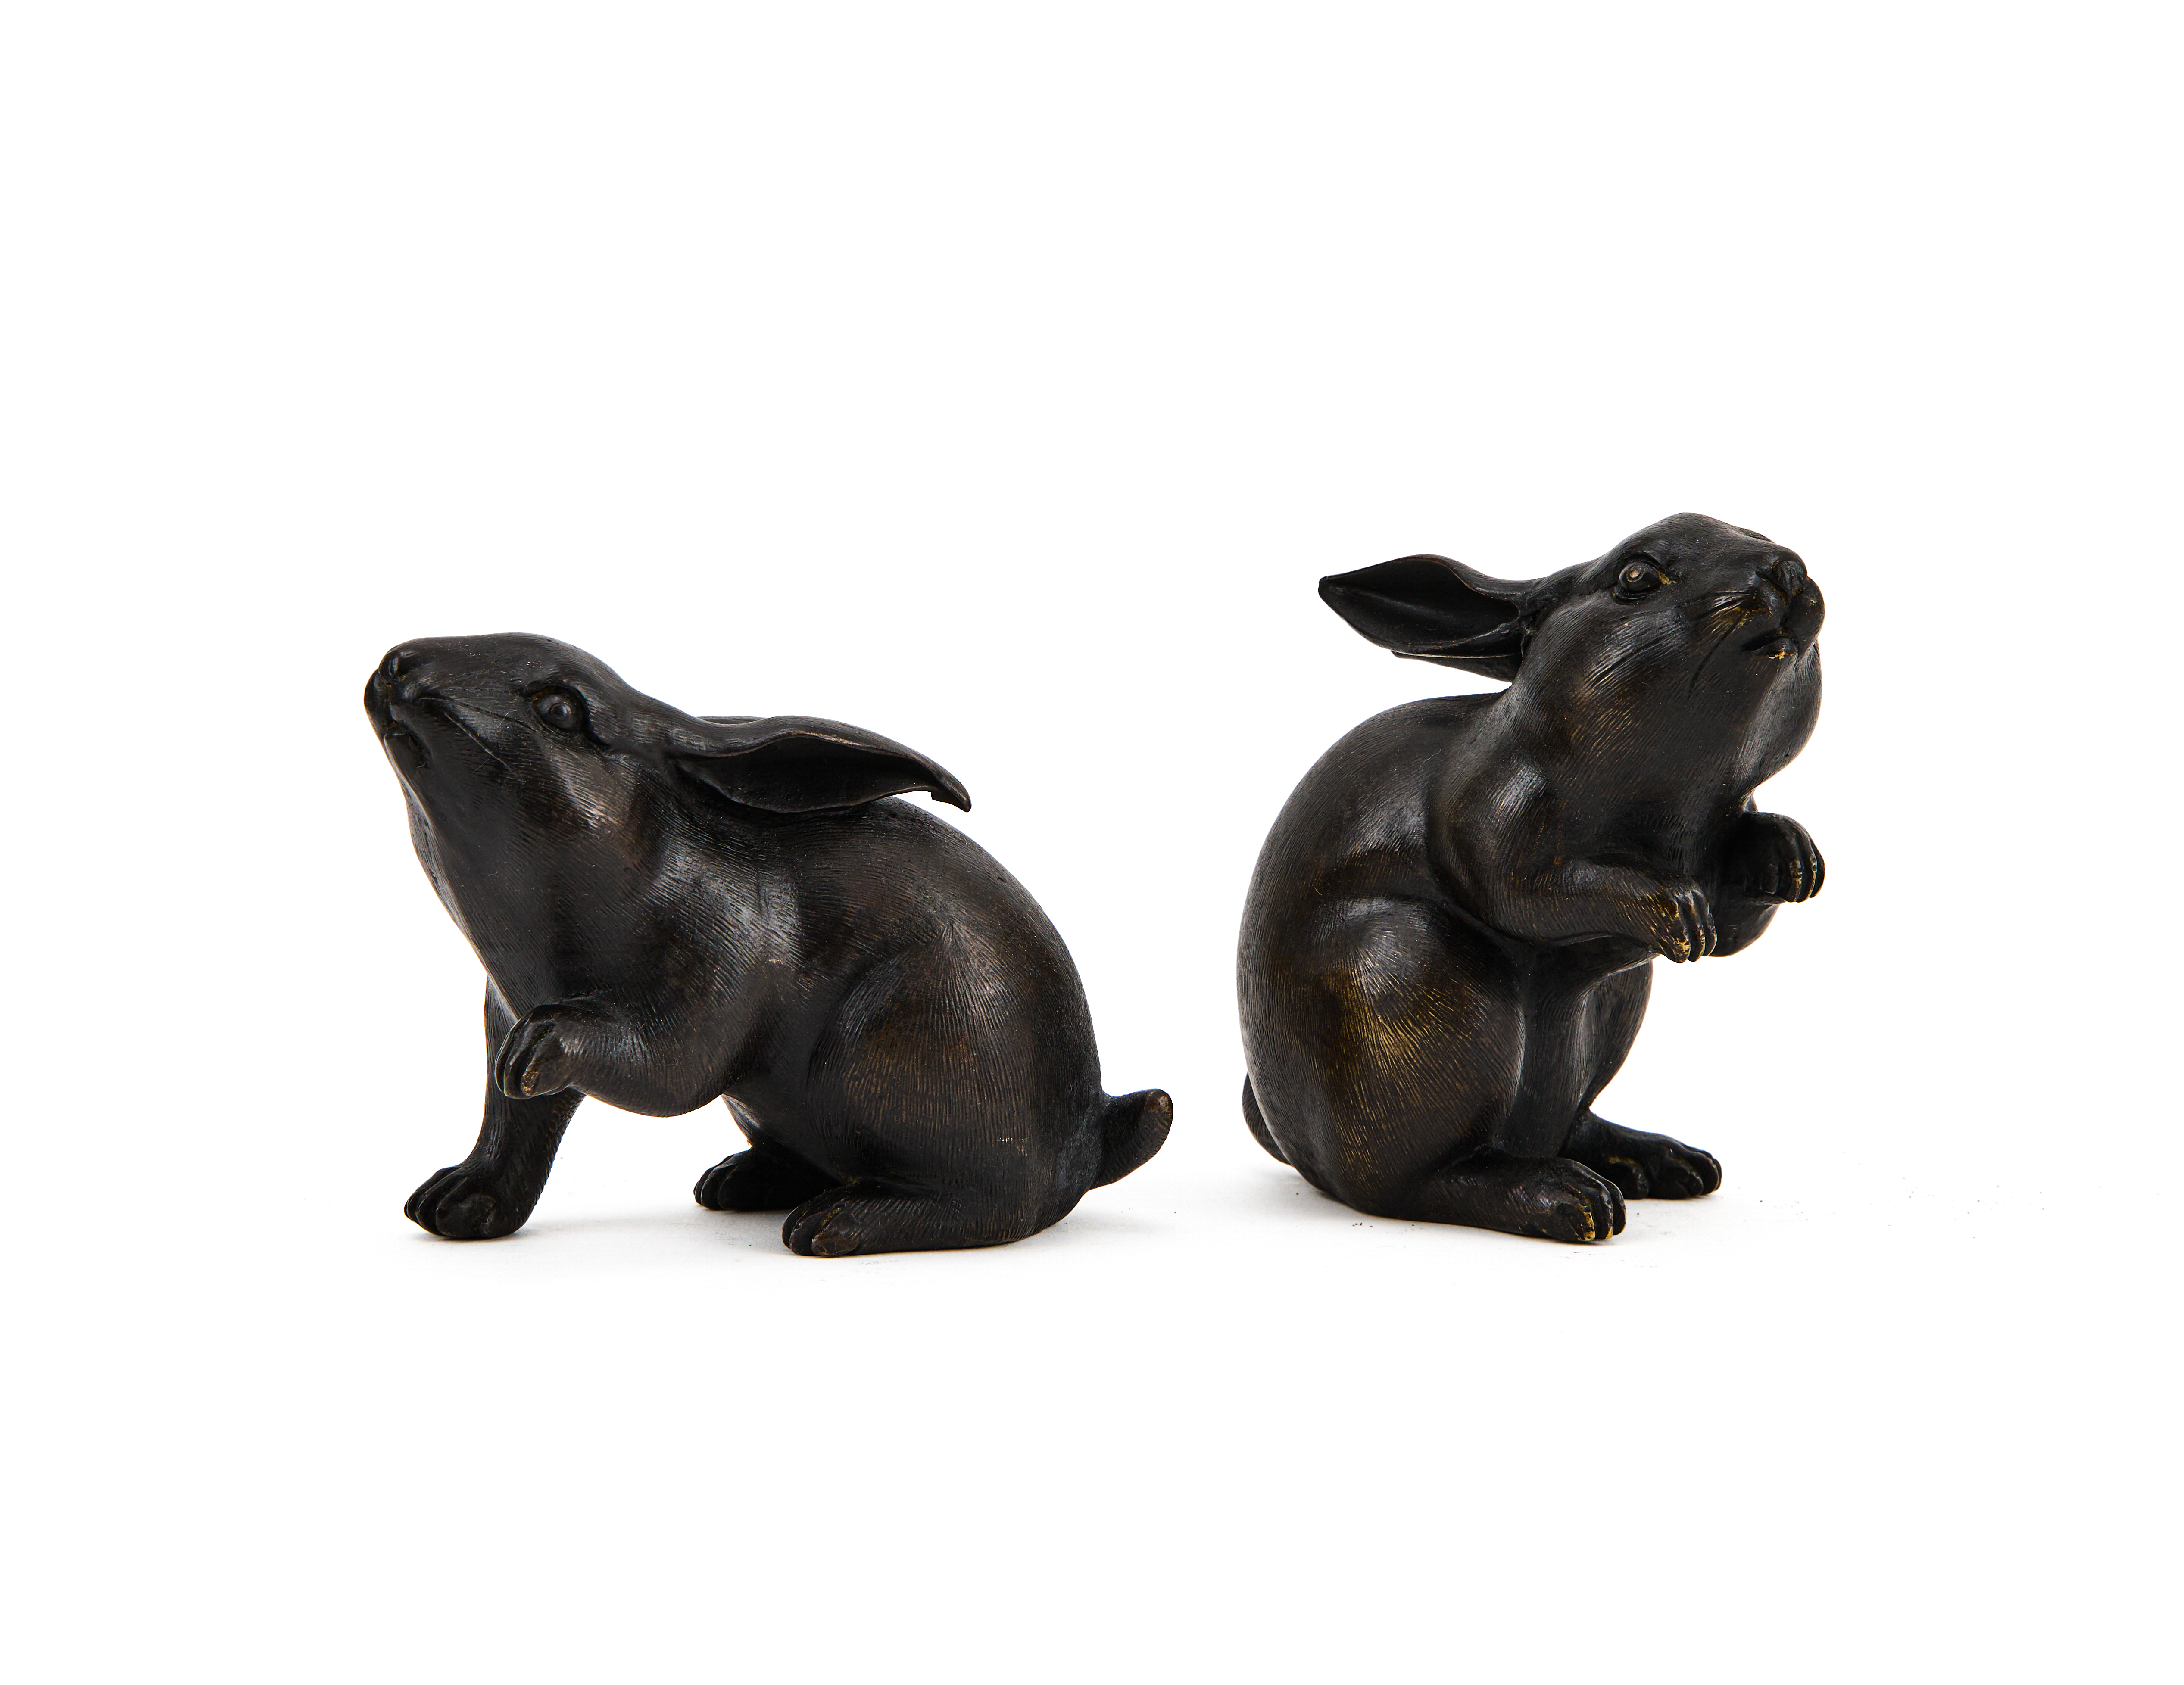 TWO JAPANESE BRONZE HARES, MEIJI PERIOD (1868-1912) - Image 3 of 5